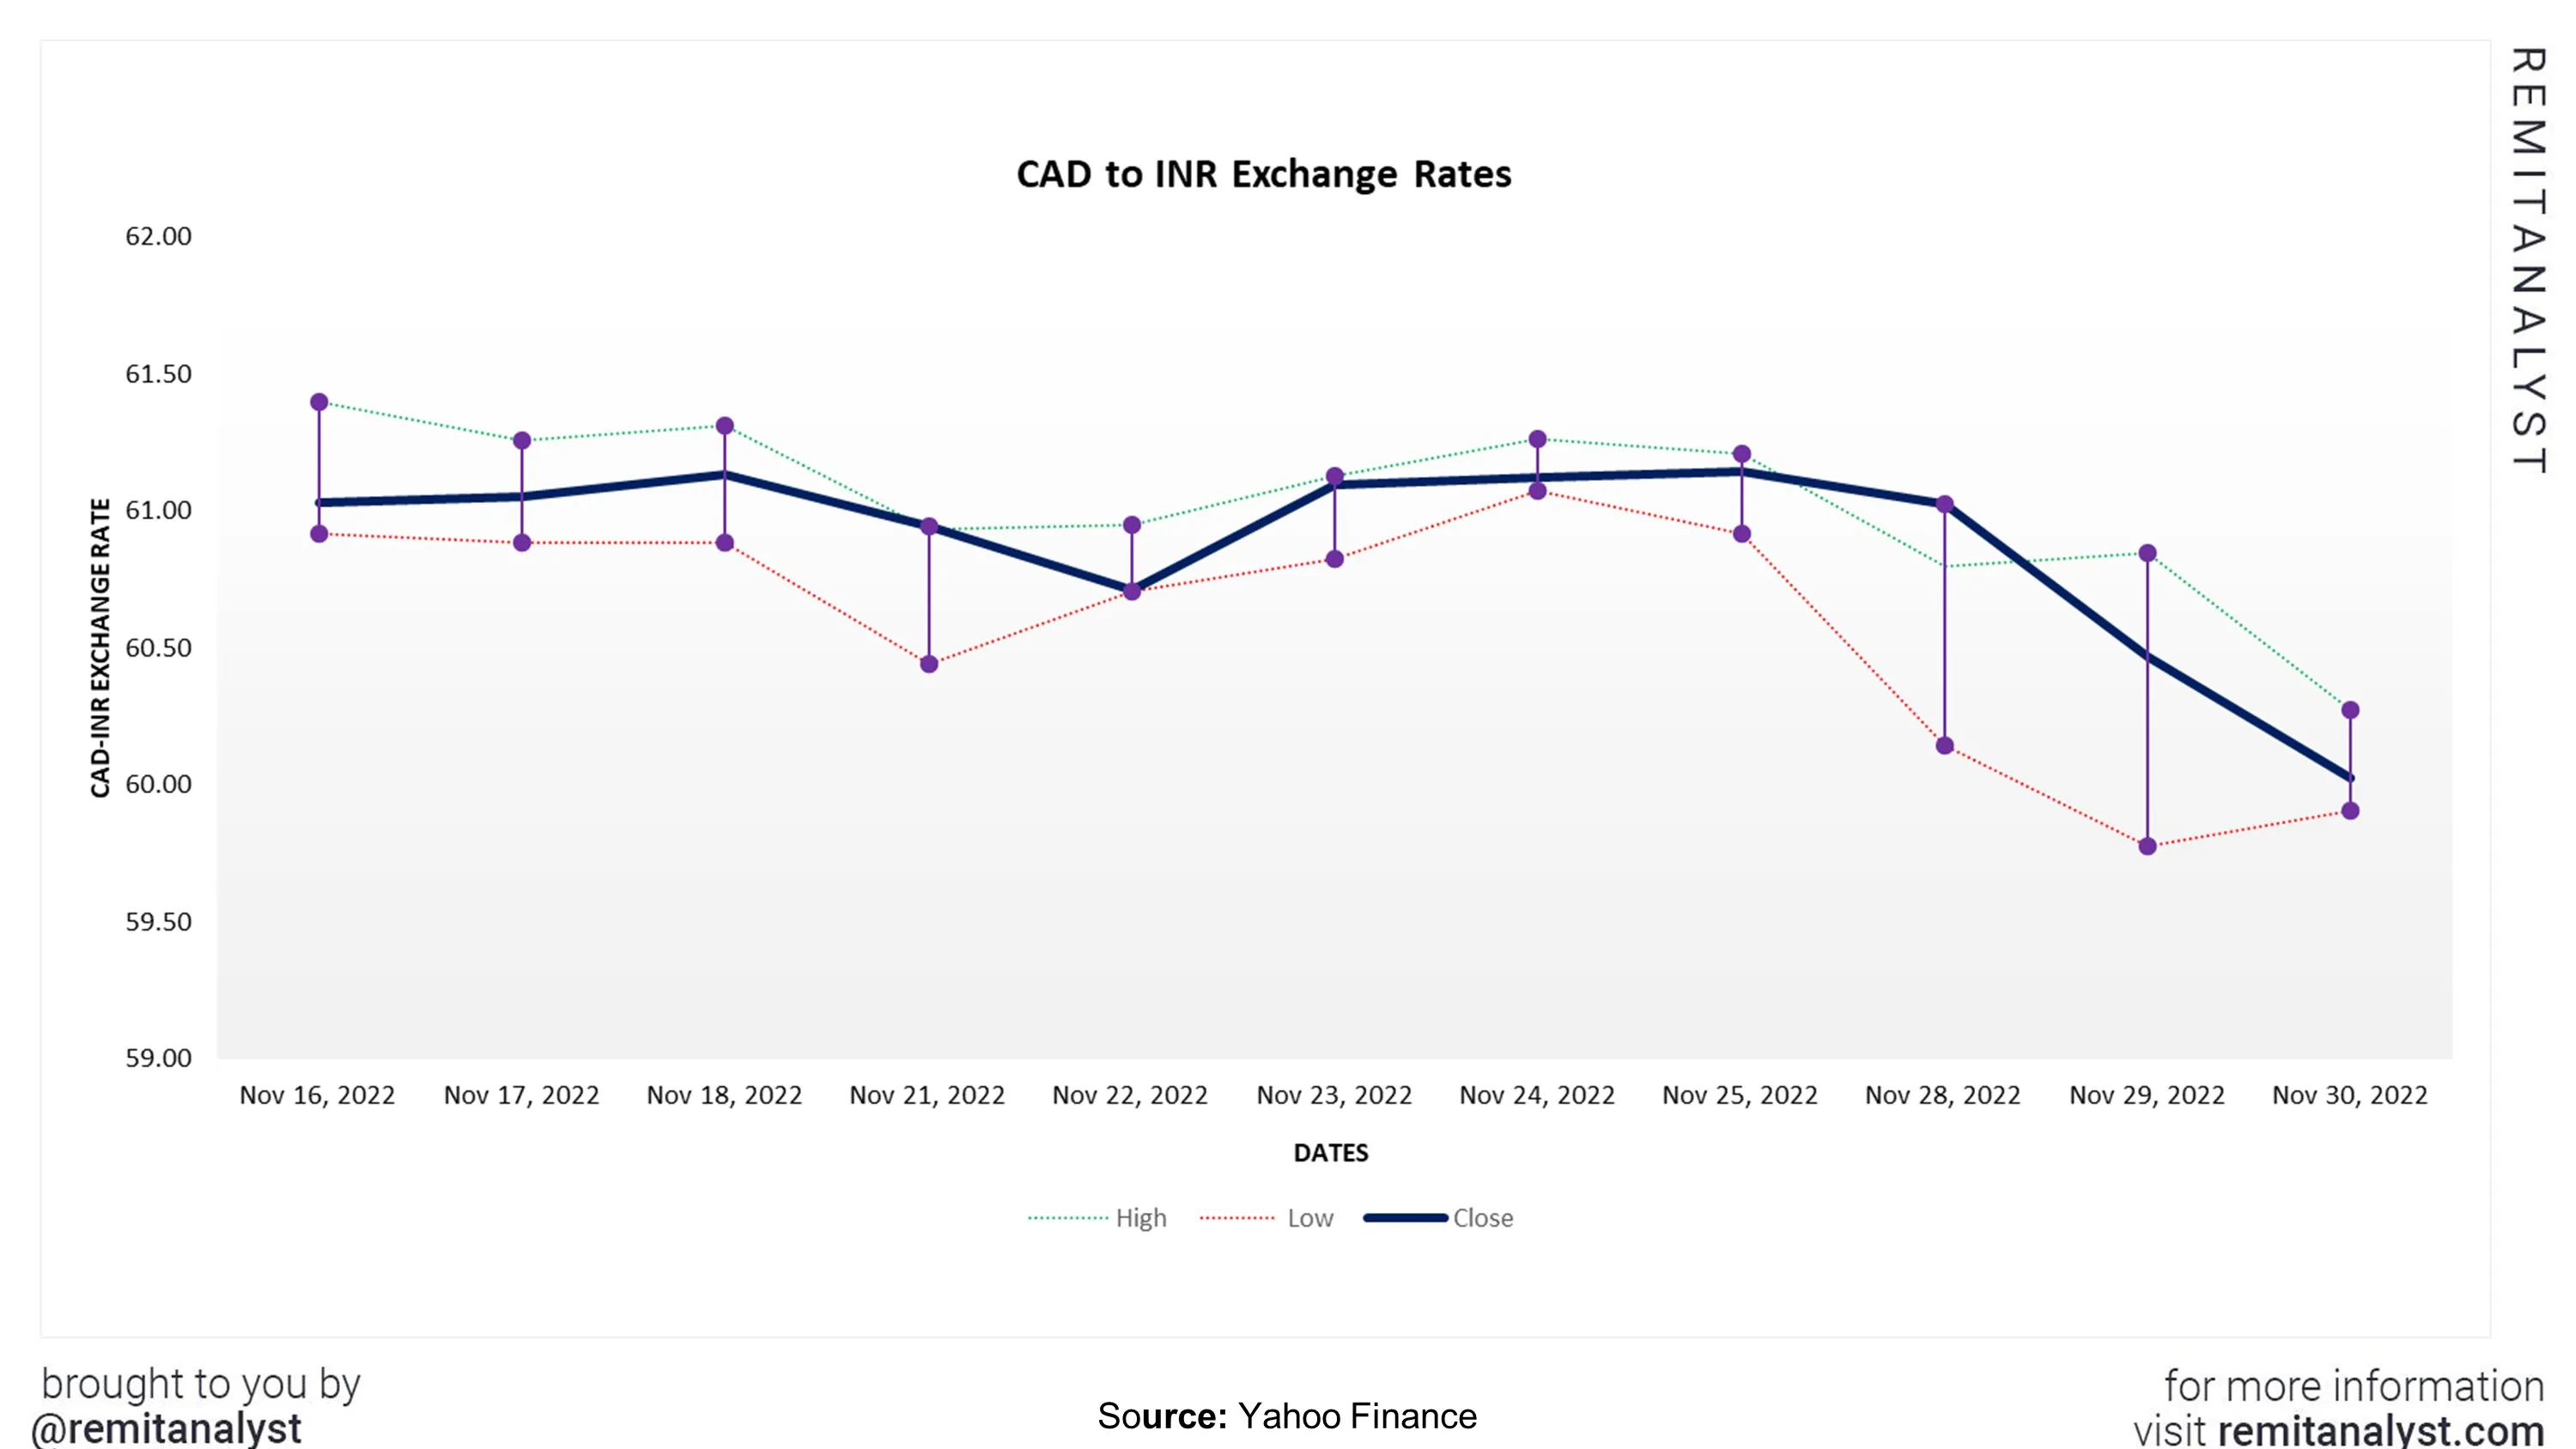 cad-to-inr-exchange-rate-from-16-nov-2022-to-30-nov-2022